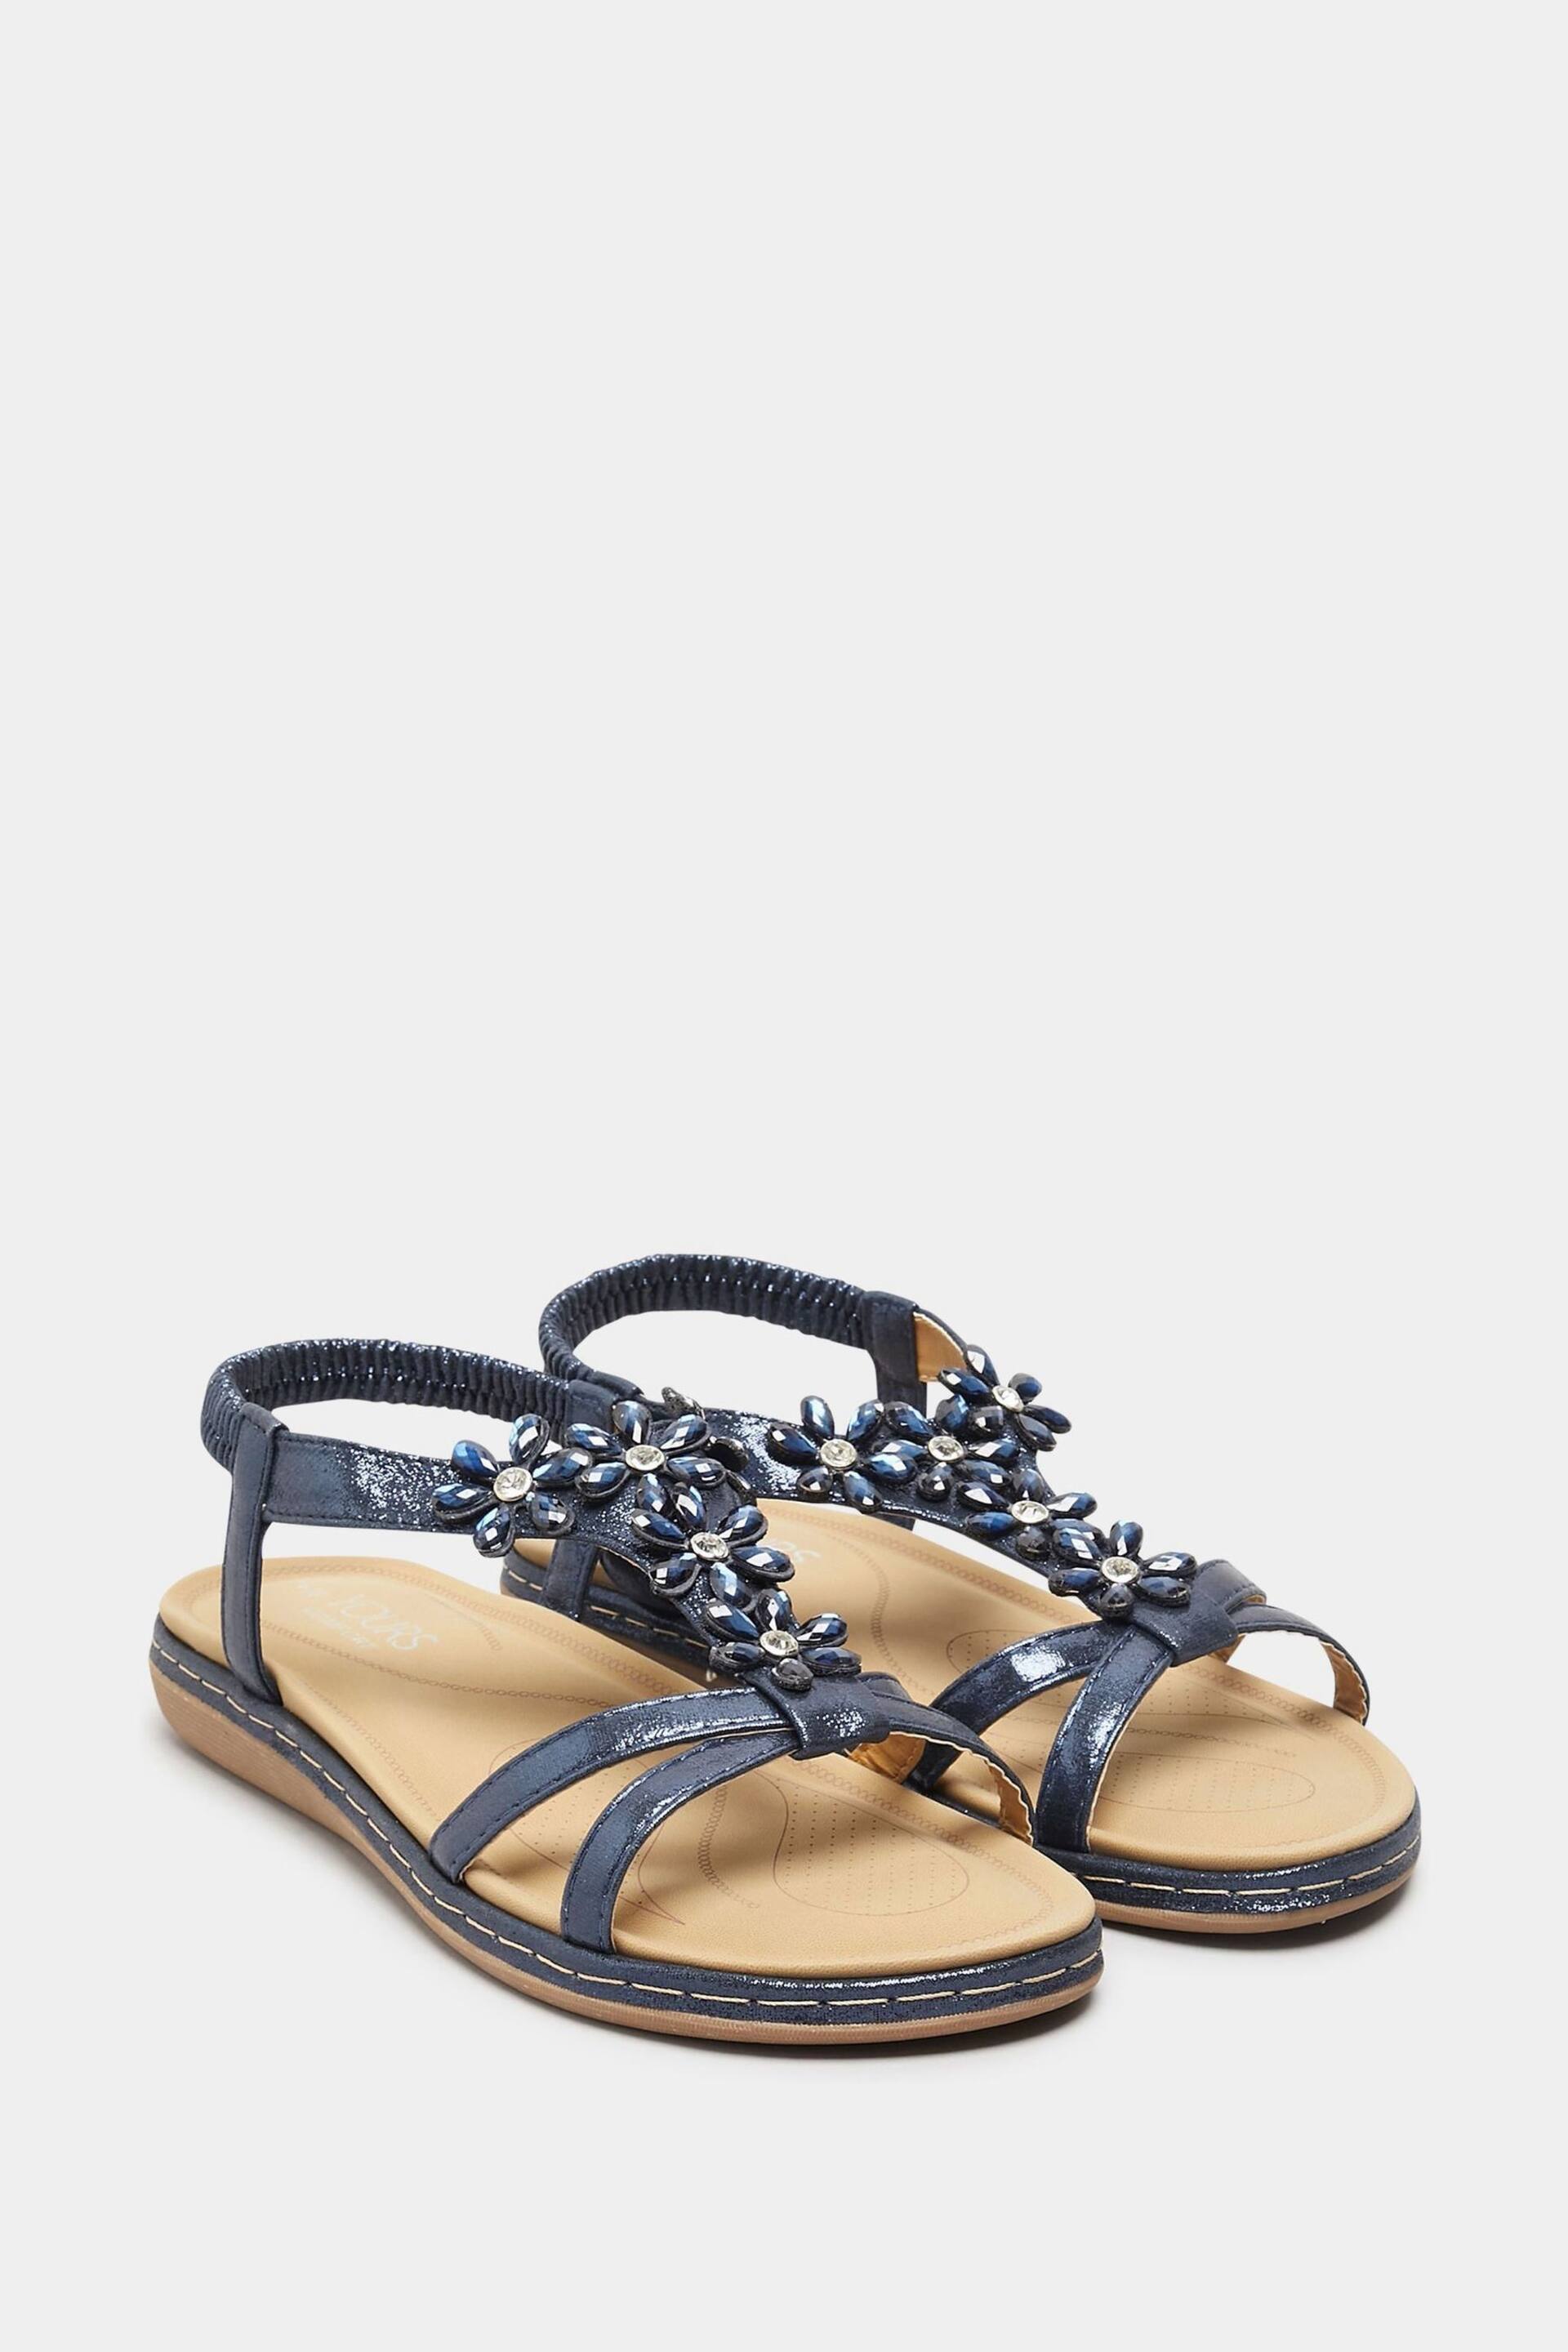 Yours Curve Blue Dark Wide Fit Wide Fit Diamante Flower Sandals - Image 3 of 5